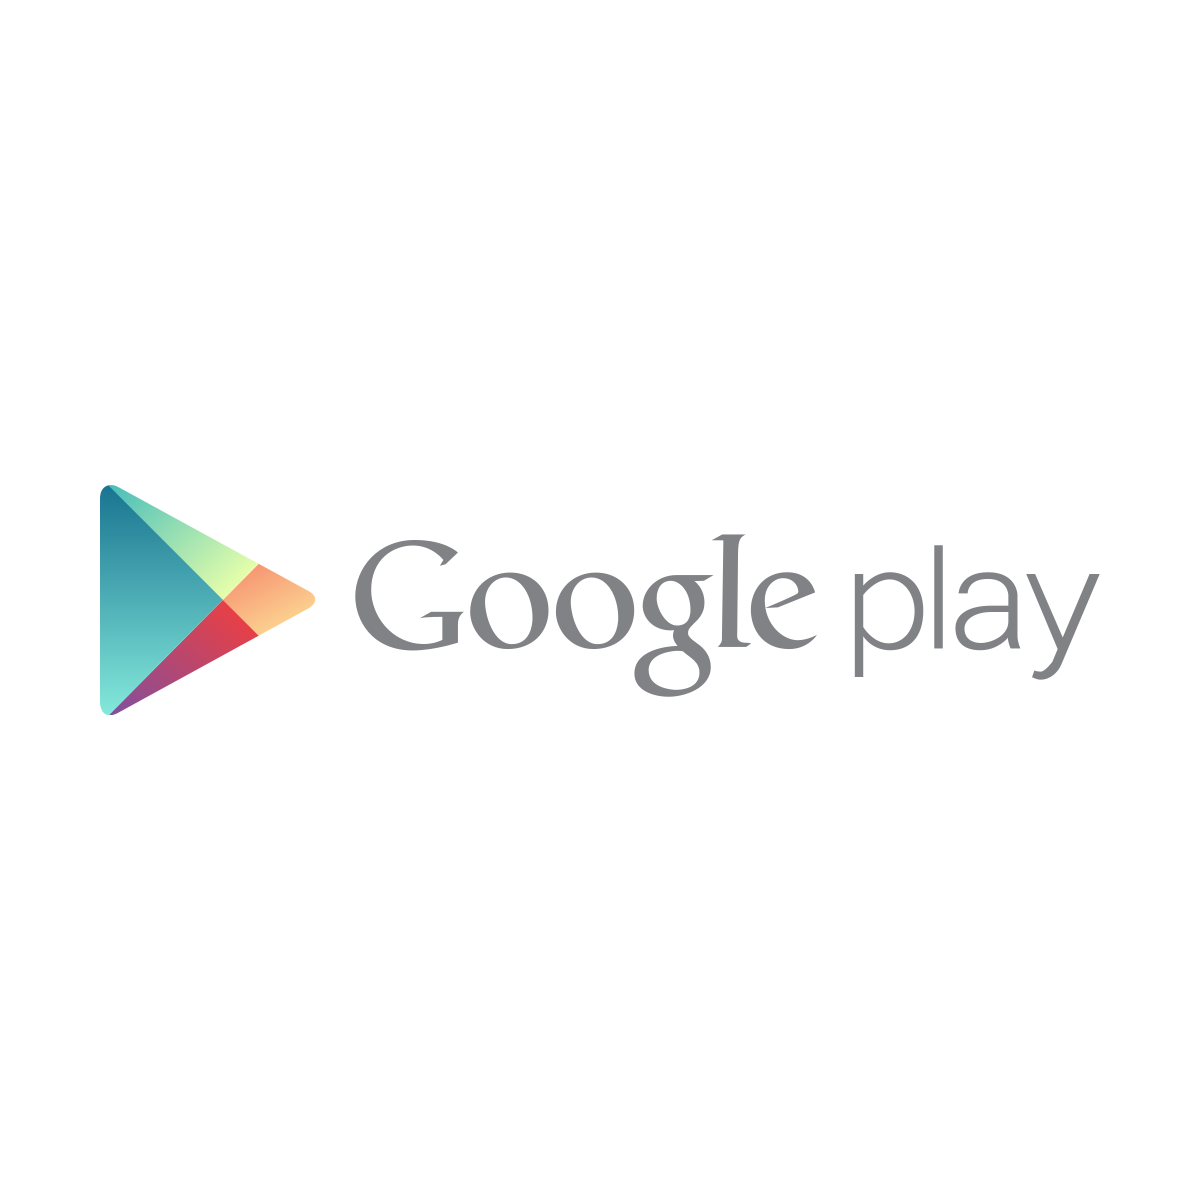 Google Play App Revenue Doubles in a Year